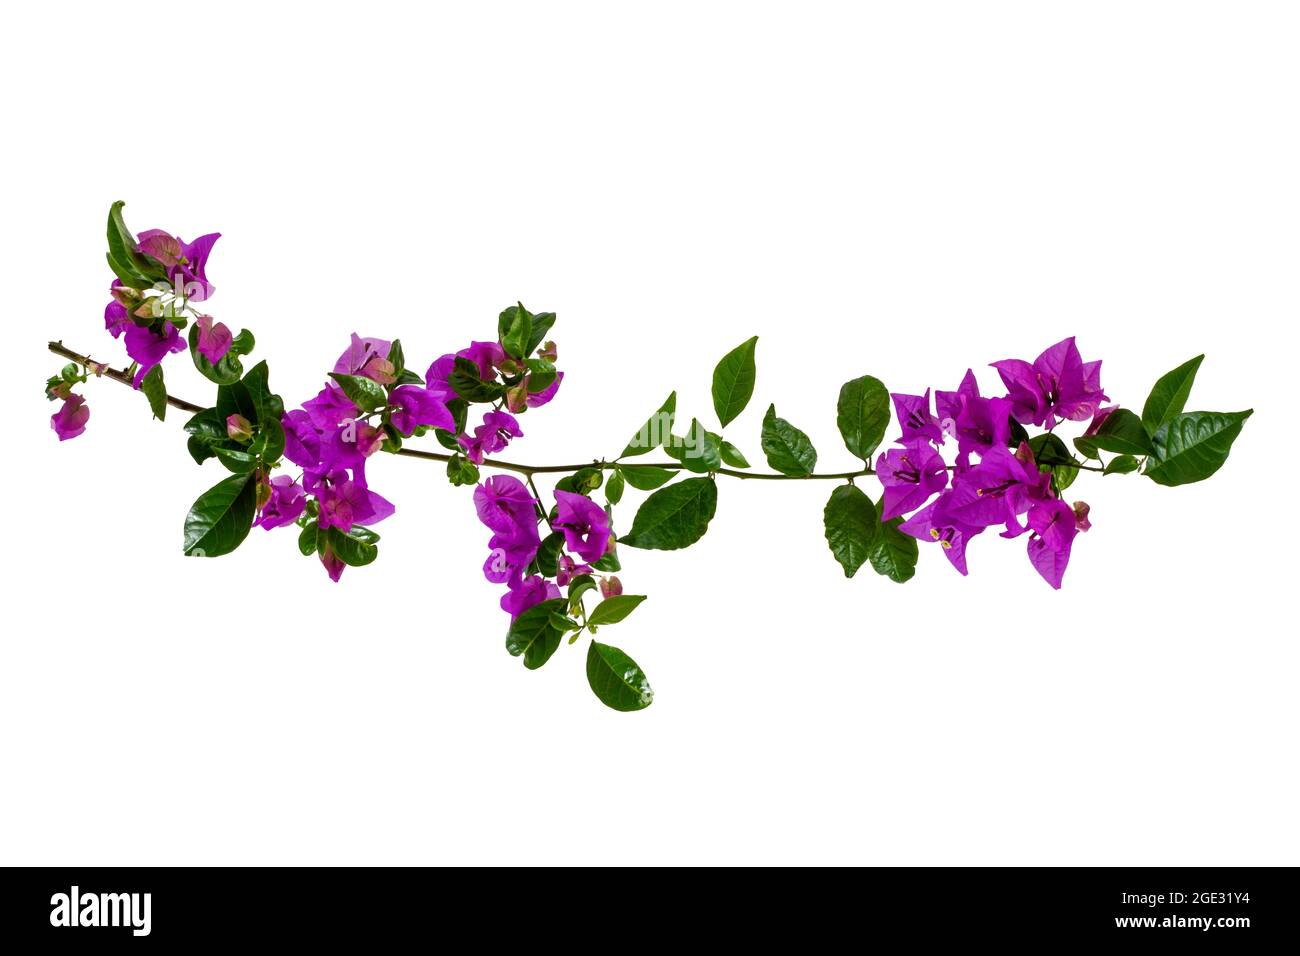 Bougainvillea glabra Cut Out Stock Images & Pictures - Alamy